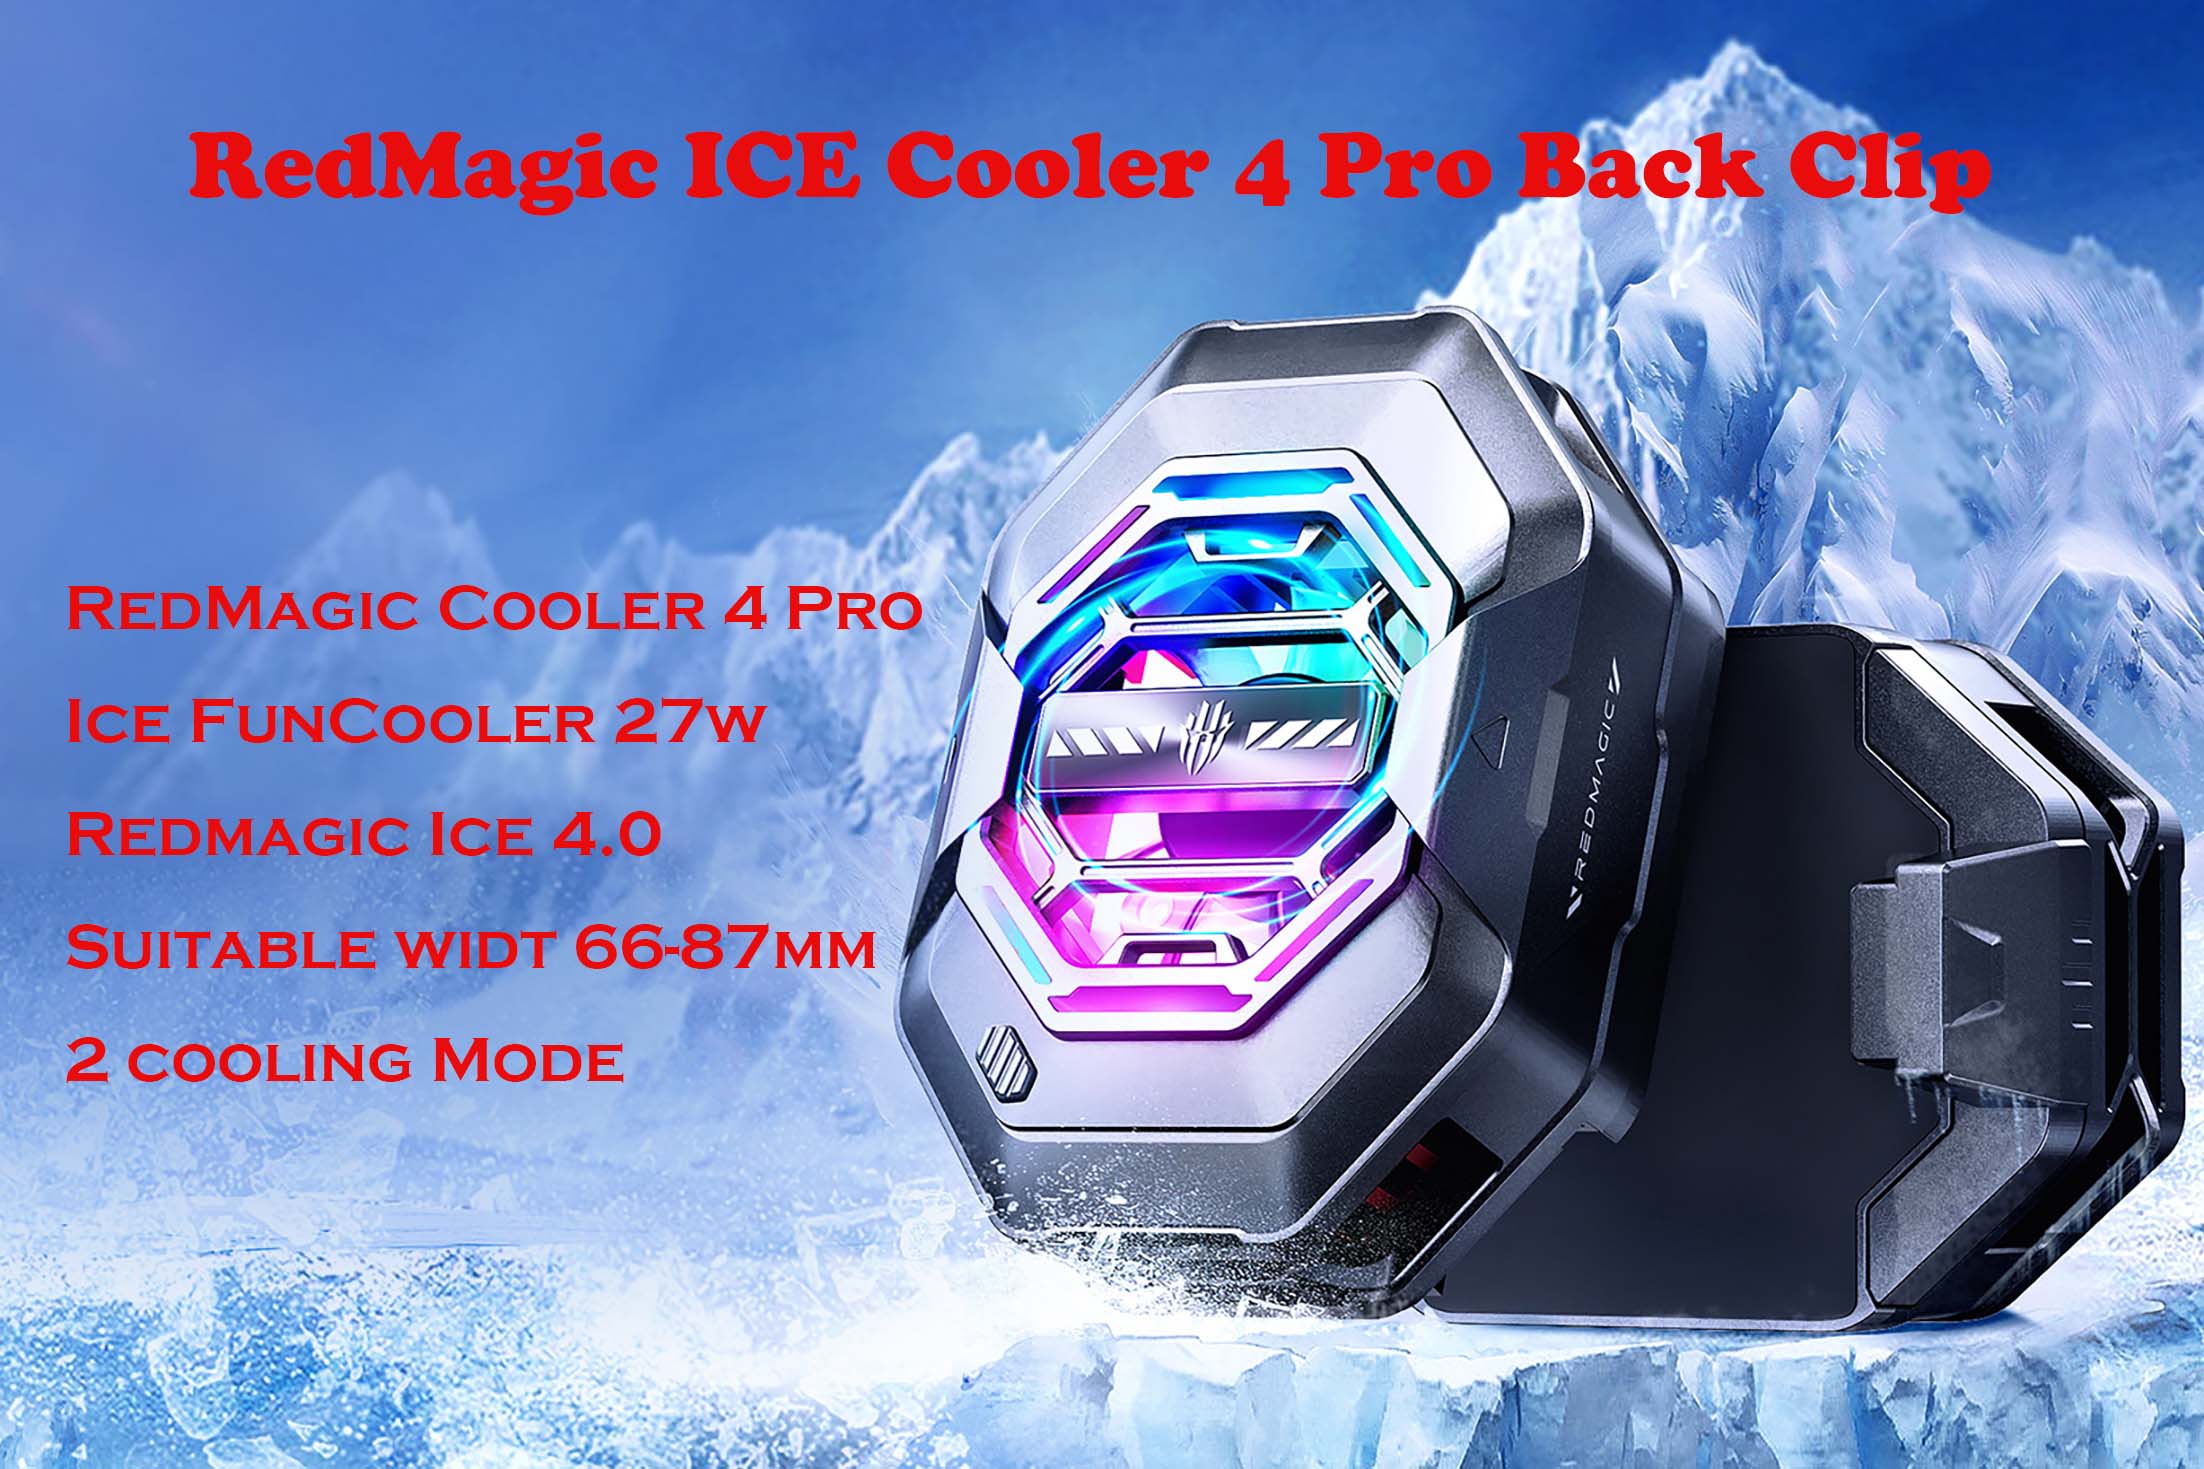 RedMagic ICE Cooler 4 Pro Back Clip Review